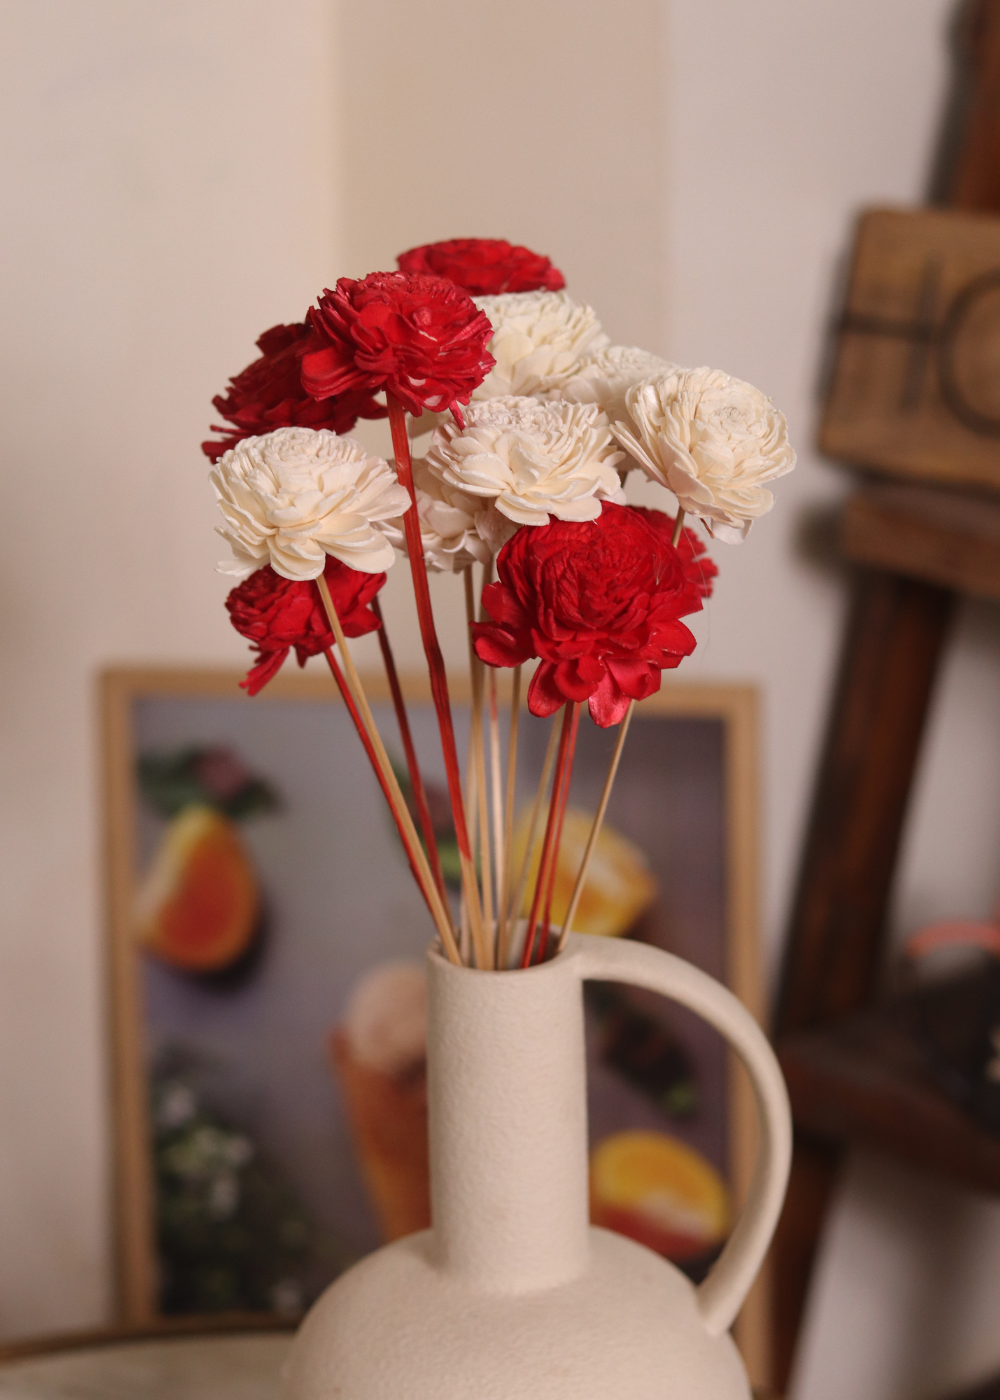 Red & white roses bunch in vase